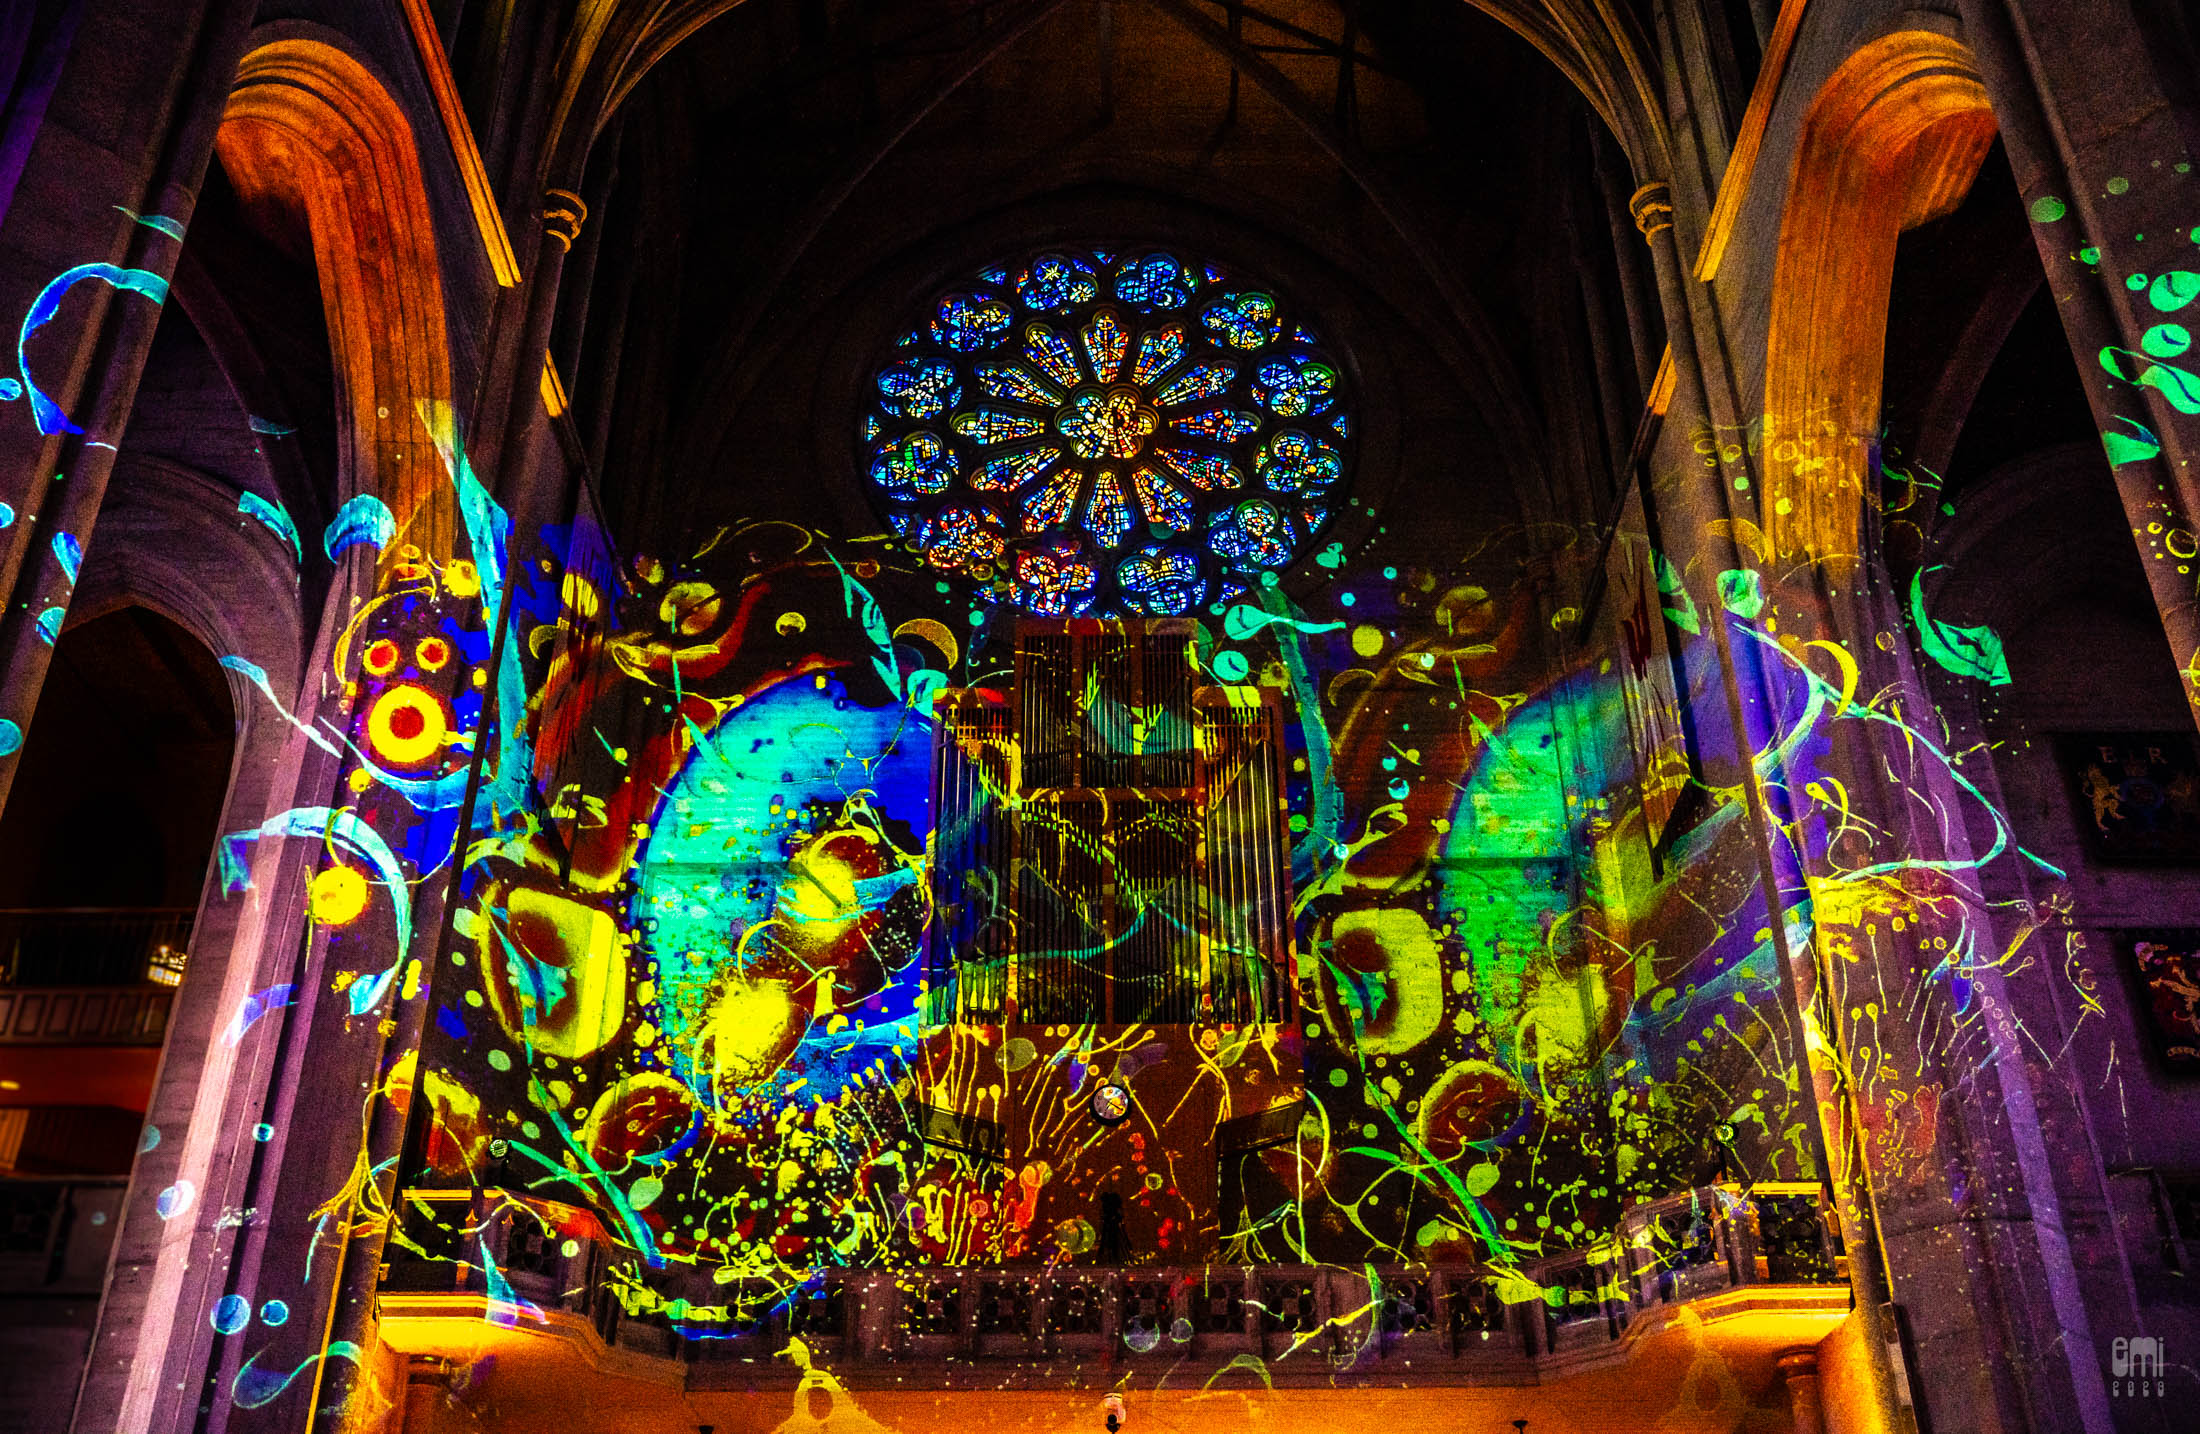 2023.6.21 TILTA Celebration of Light and Music on the Summer Solstice with Nikola Printz, Efraín Solís, Ronny Michael Greenberg, and Mad Alchemy Liquid Light Show at Grace Cathedral, SF, CA. photo by emi